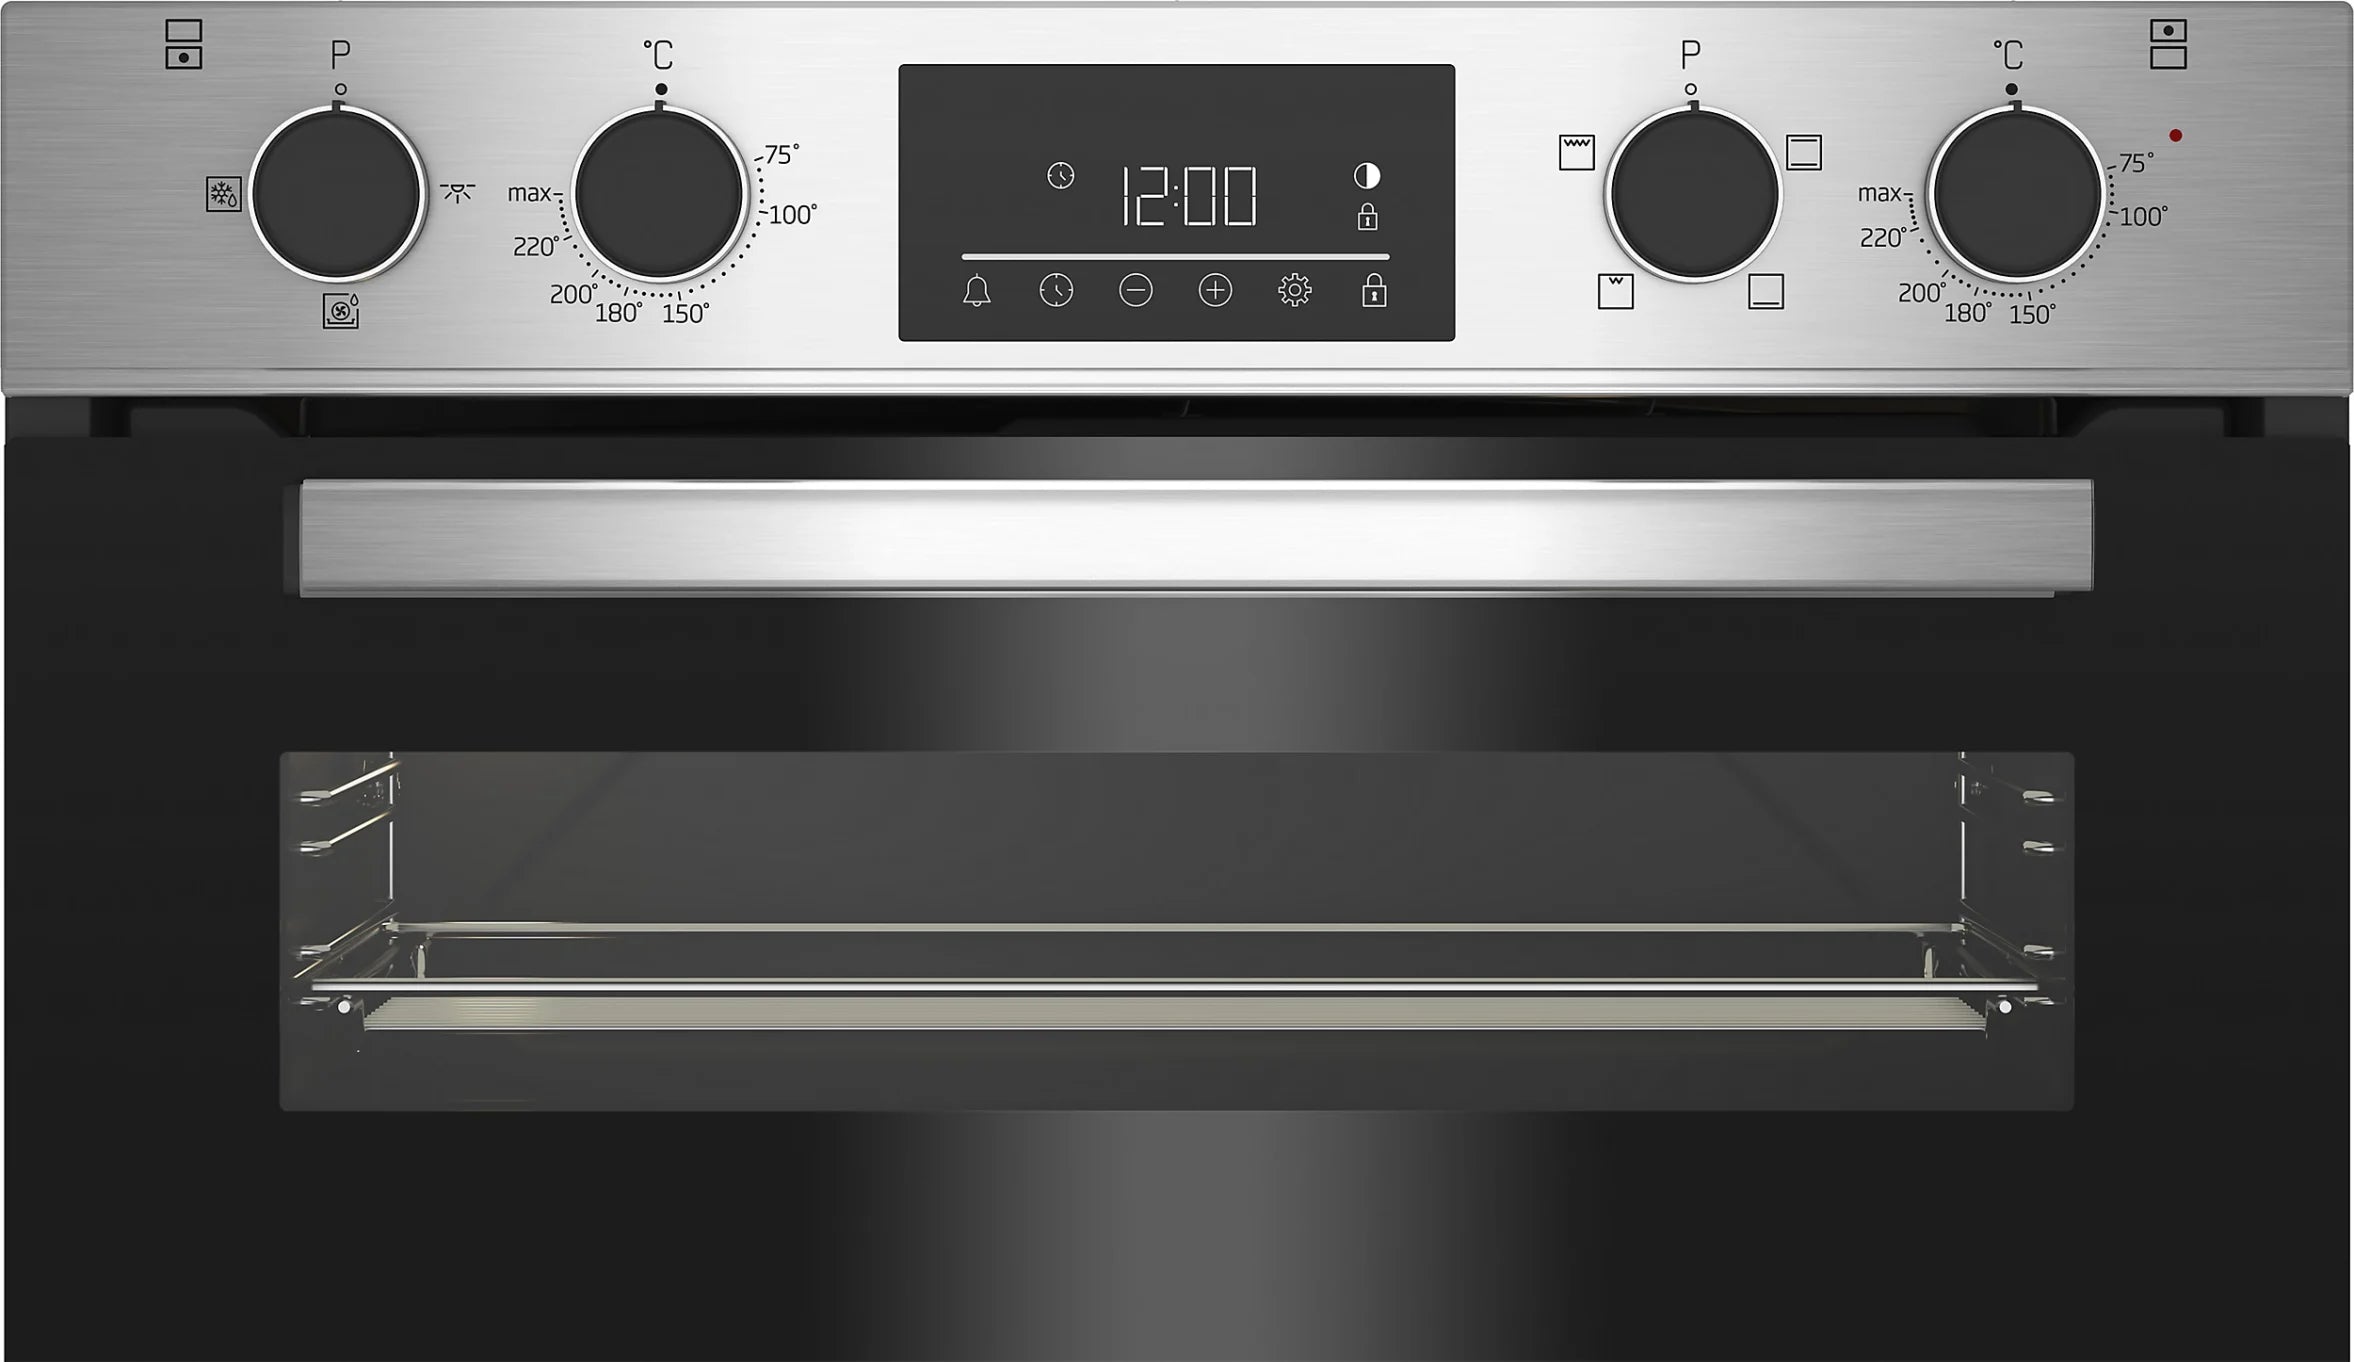 Beko BBTQF22300X Stainless Steel Built-in Double Oven Grade B 6913